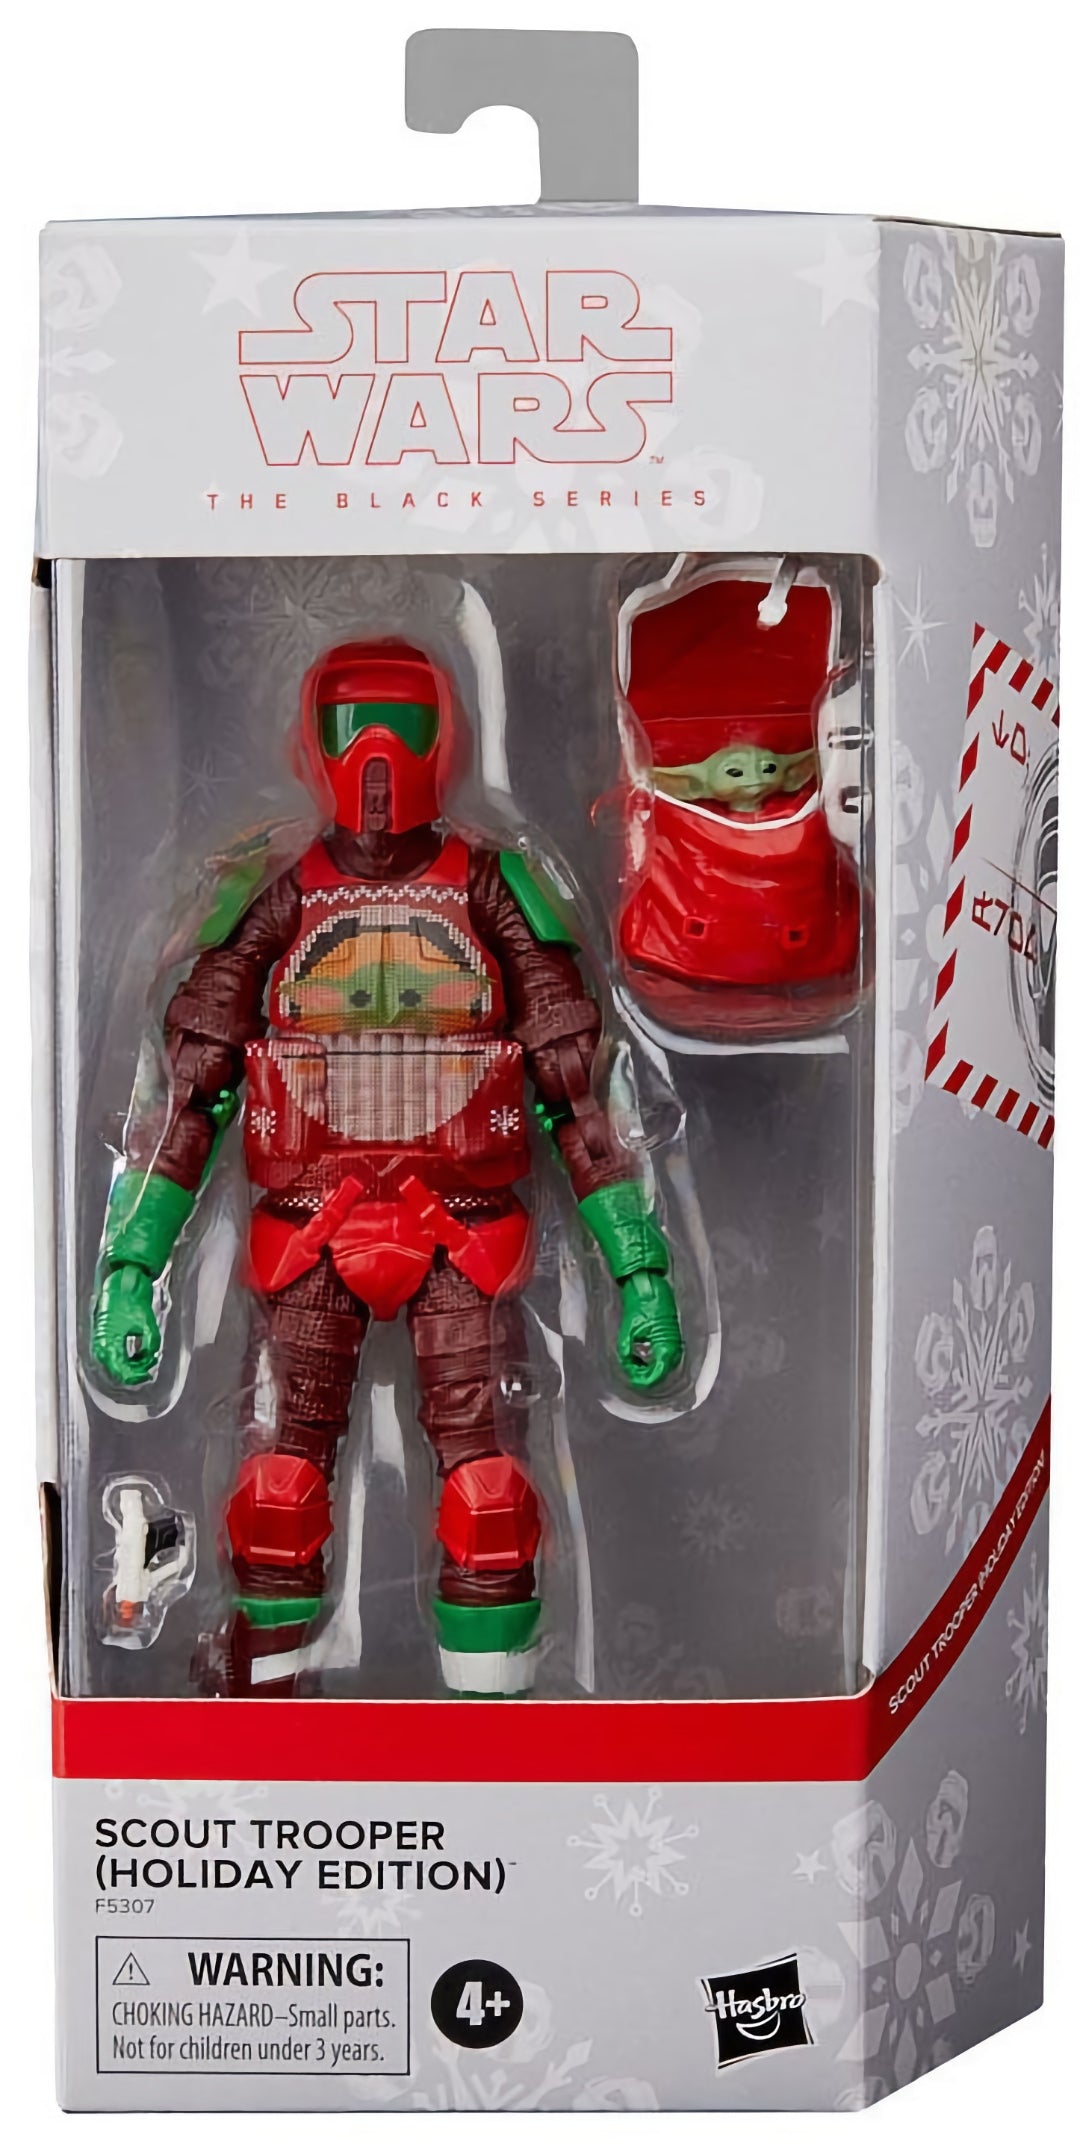 Hasbro - Star Wars Black Series - The Mandalorian - Scout Trooper with Grogu (Holiday Edition)